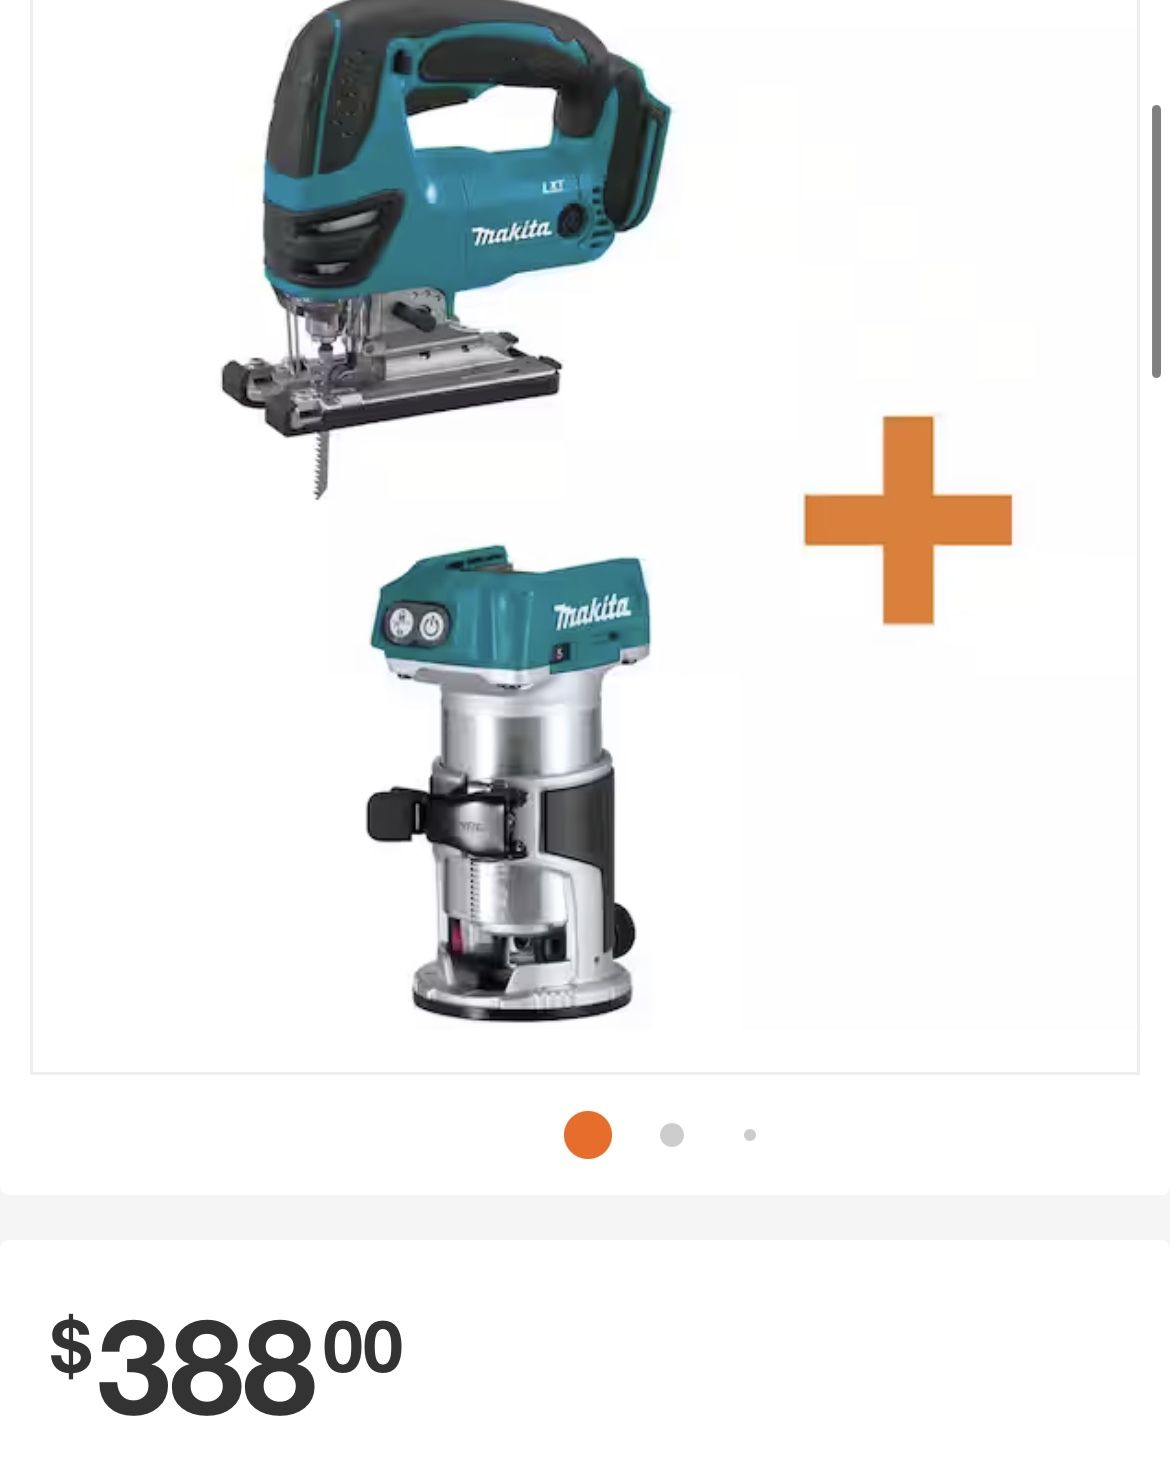 NEW Makita 18V LXT Lithium-Ion Cordless Jigsaw (Tool-Only) with 18V LXT  Lithium-Ion Brushless Variable Speed Compact Router for Sale in Lomita, CA  OfferUp